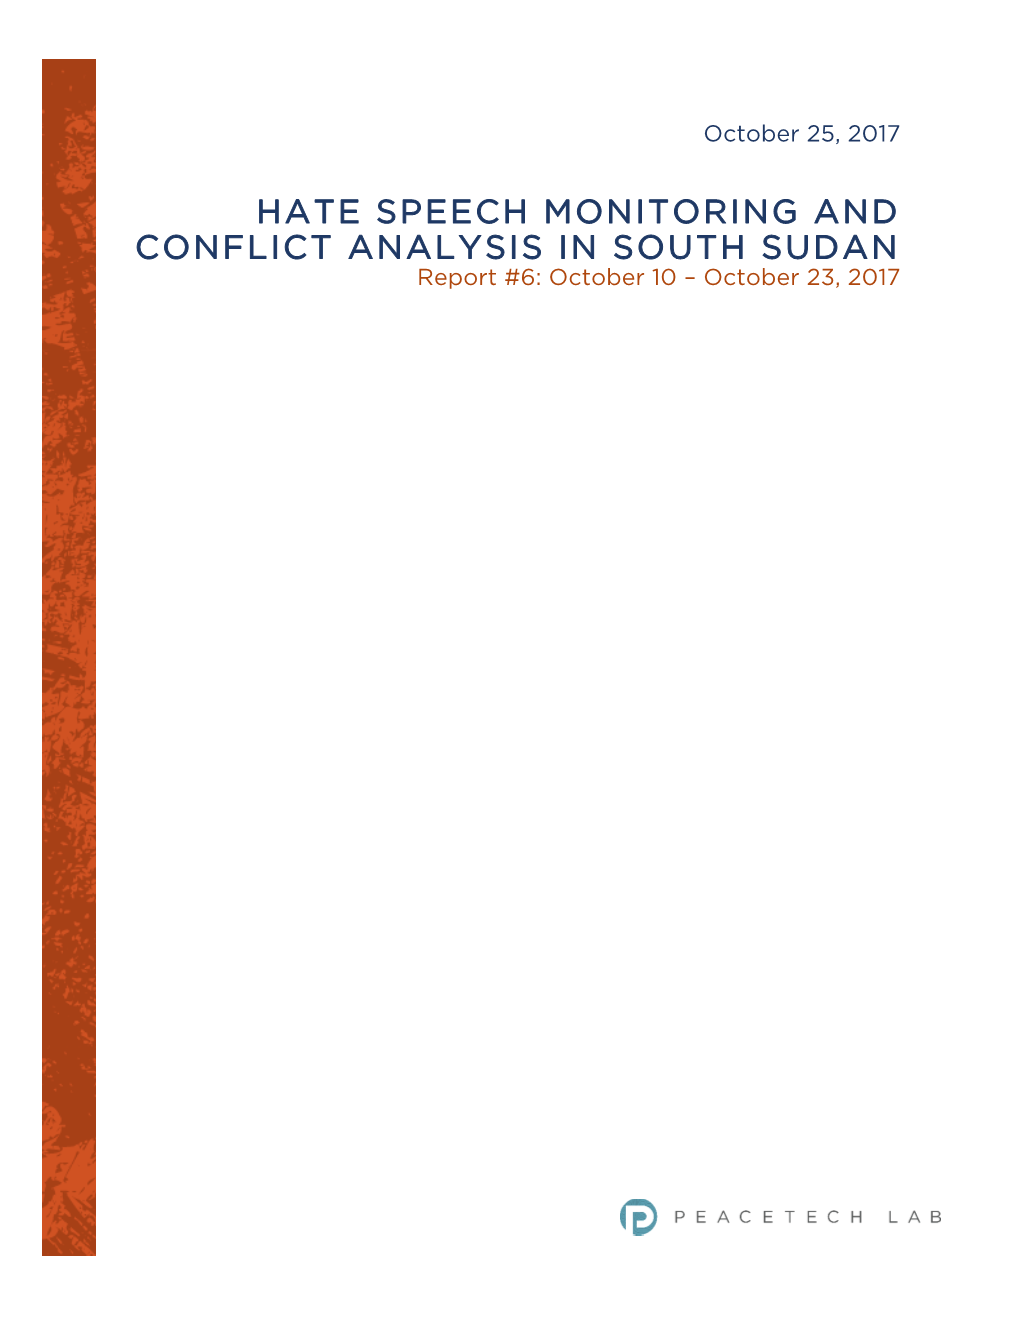 HATE SPEECH MONITORING and CONFLICT ANALYSIS in SOUTH SUDAN Report #6: October 10 – October 23, 2017